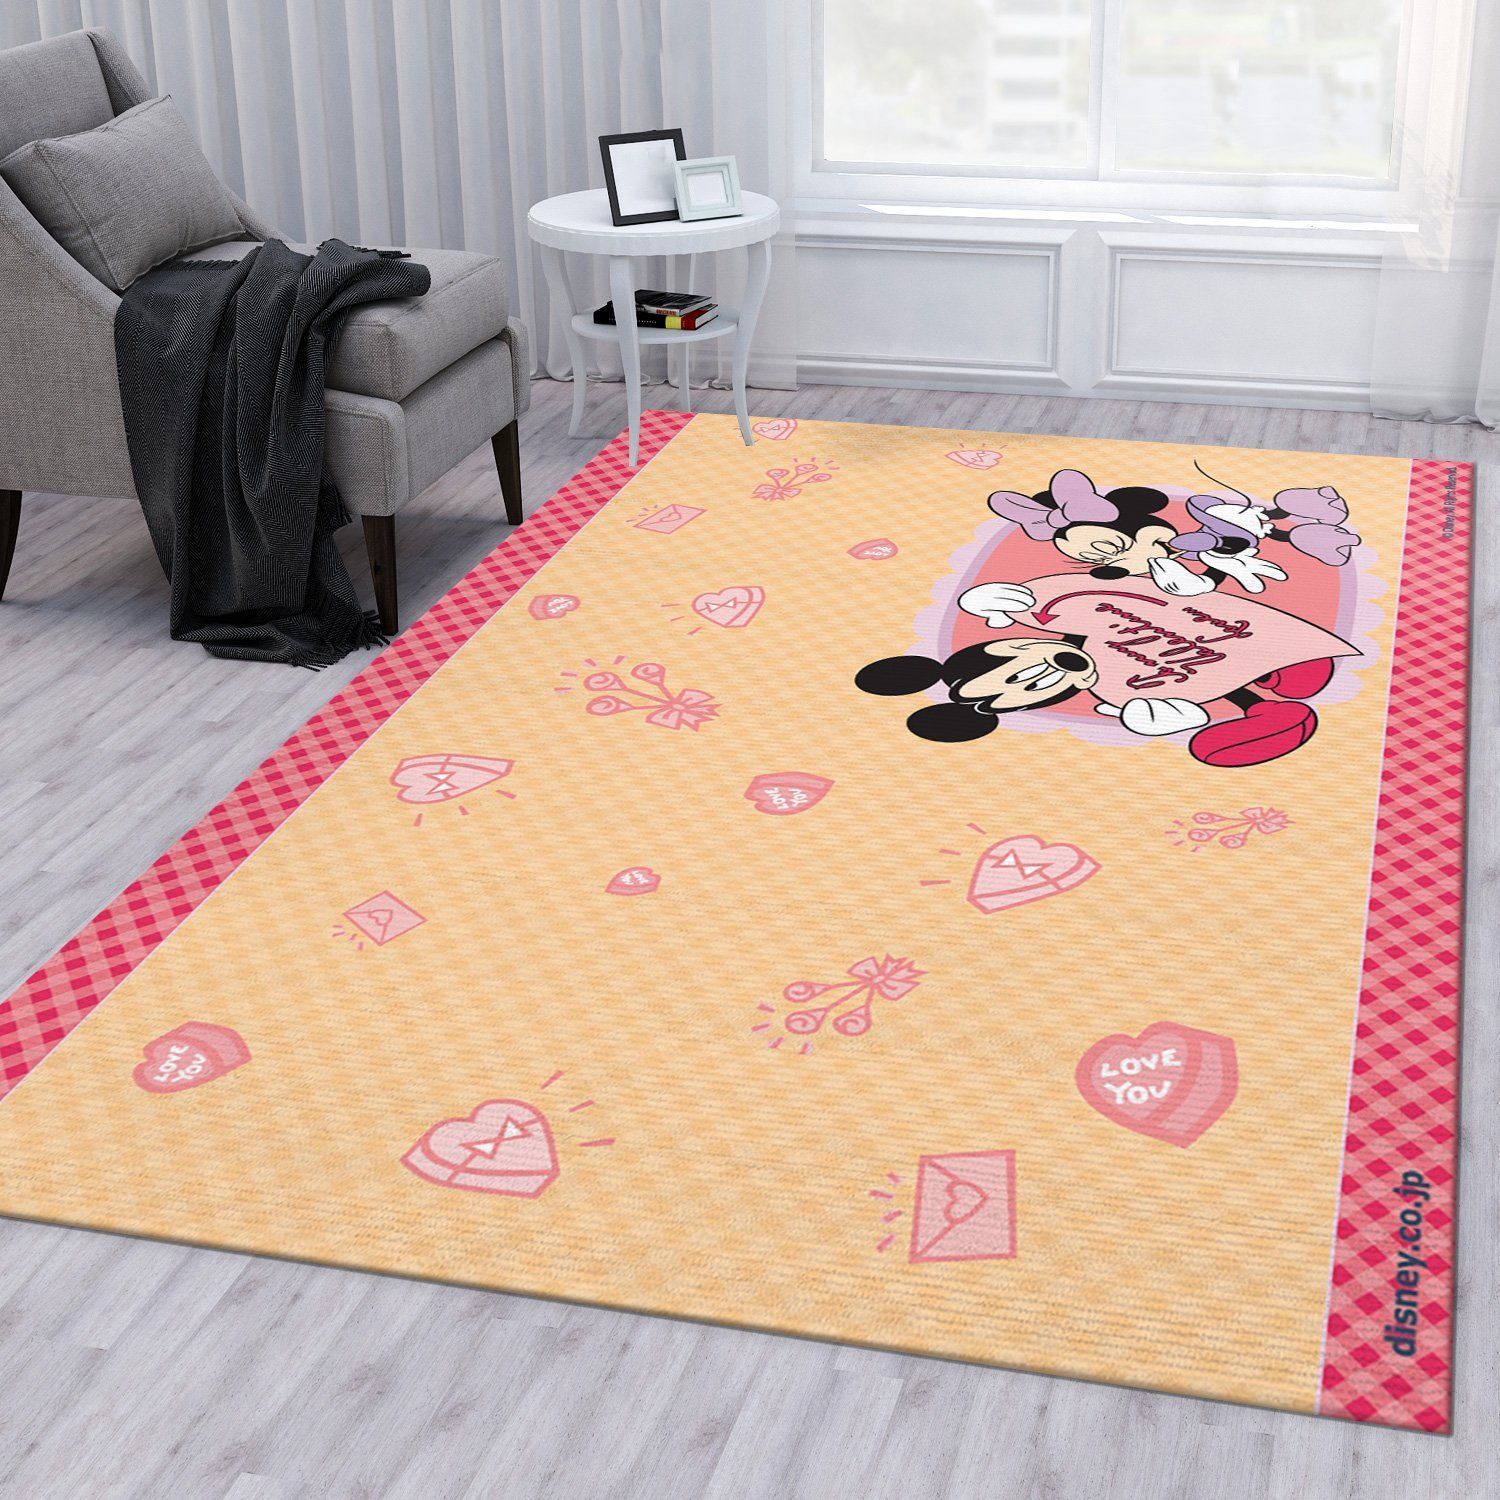 Minnie Mouse Ver10 Area Rug For Christmas Bedroom Rug Christmas Gift US Decor - Indoor Outdoor Rugs 1